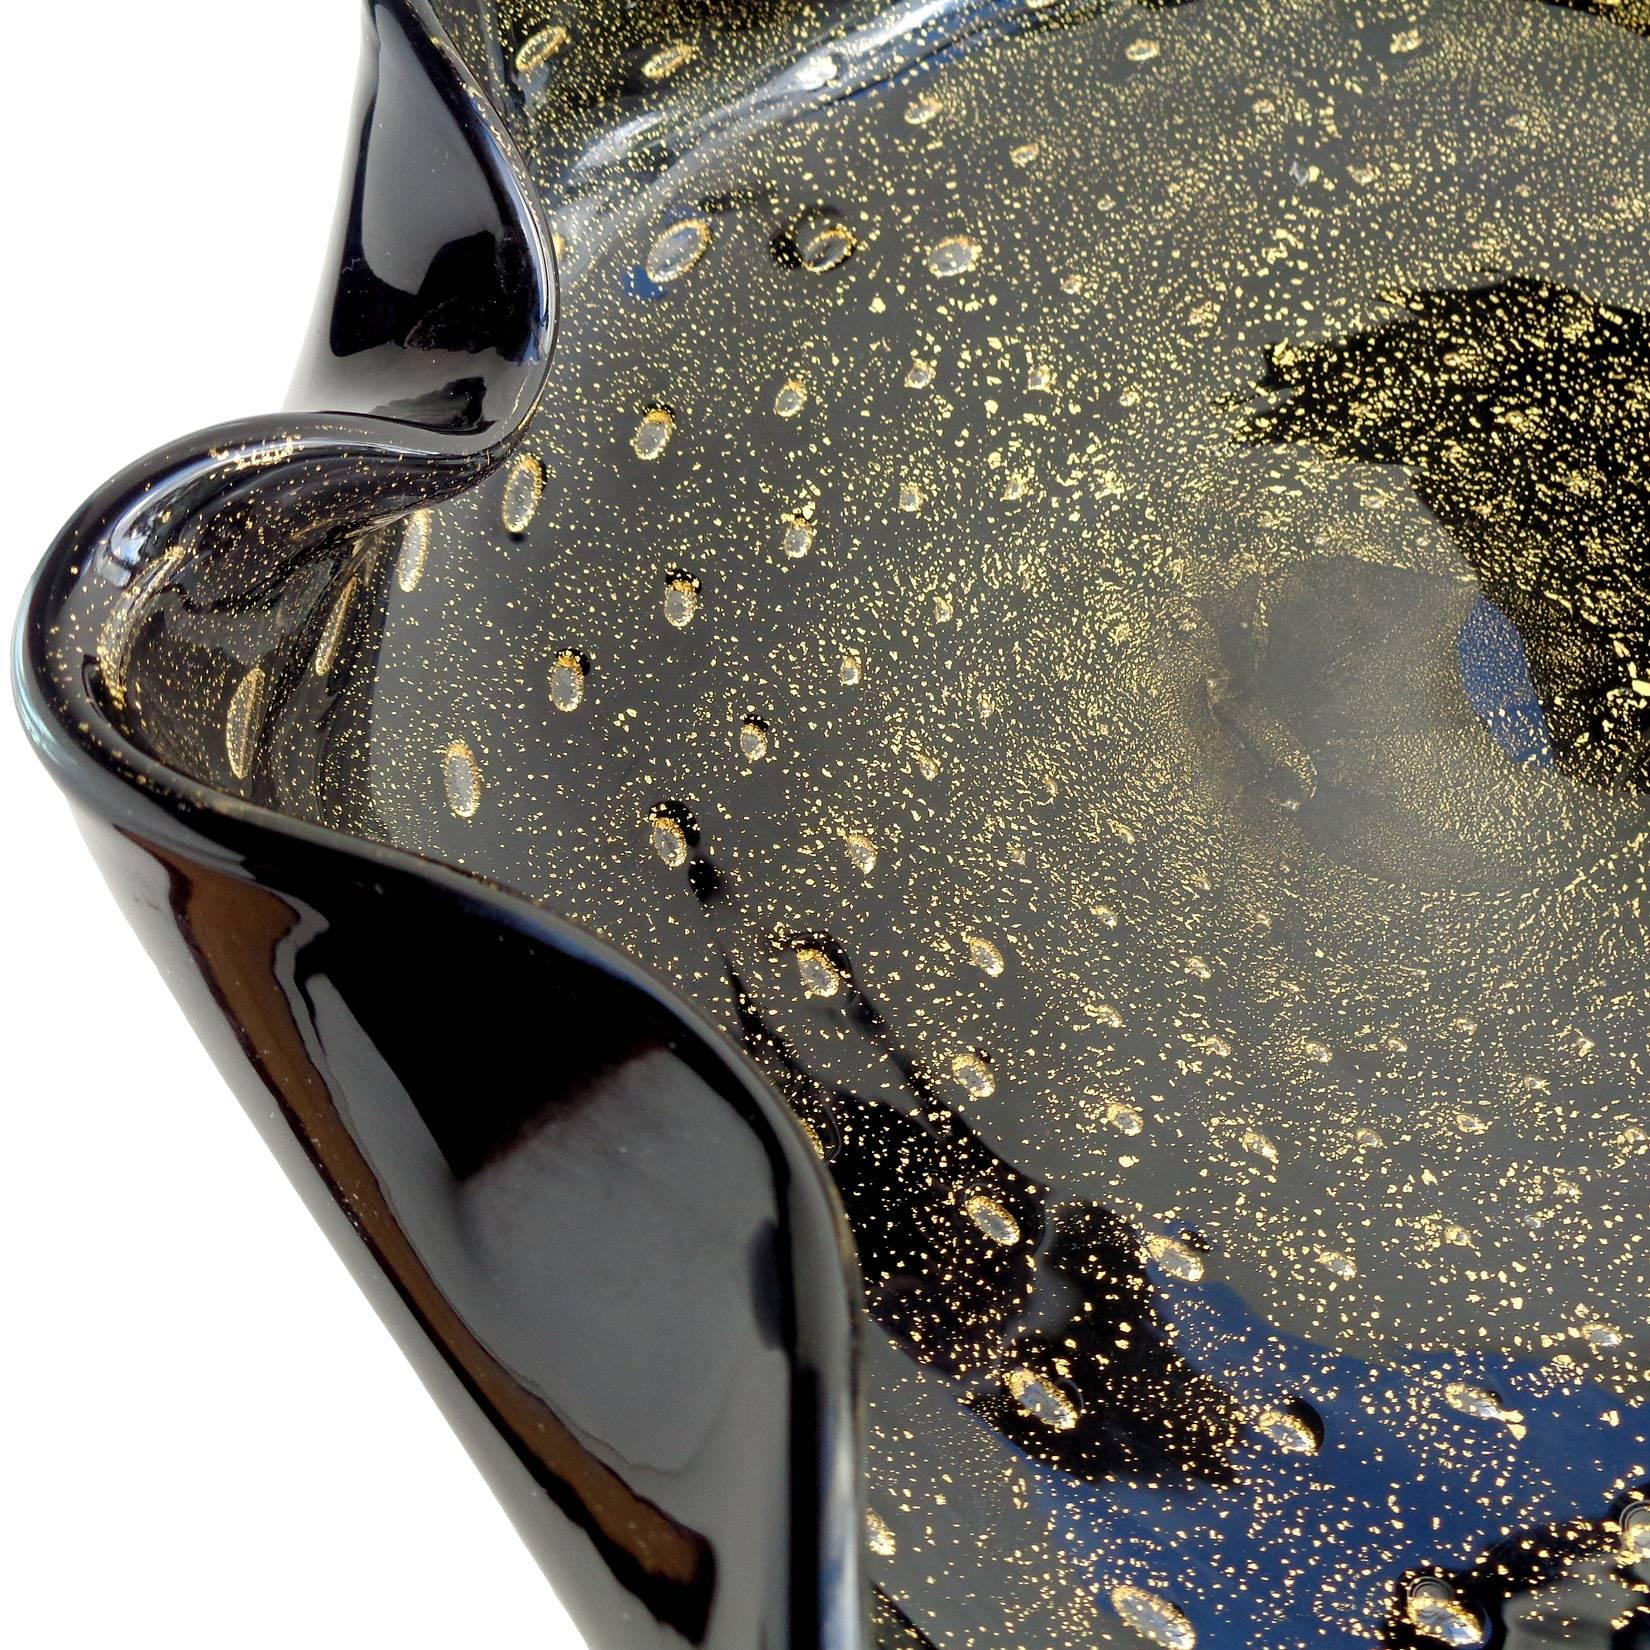 Free shipping worldwide! See details below description.

Gorgeous large Murano handblown black, controlled bubbles and gold flecks art glass centerpiece bowl. Documented to designer Alfredo Barbini and published in his catalog, circa 1950s-1960s.